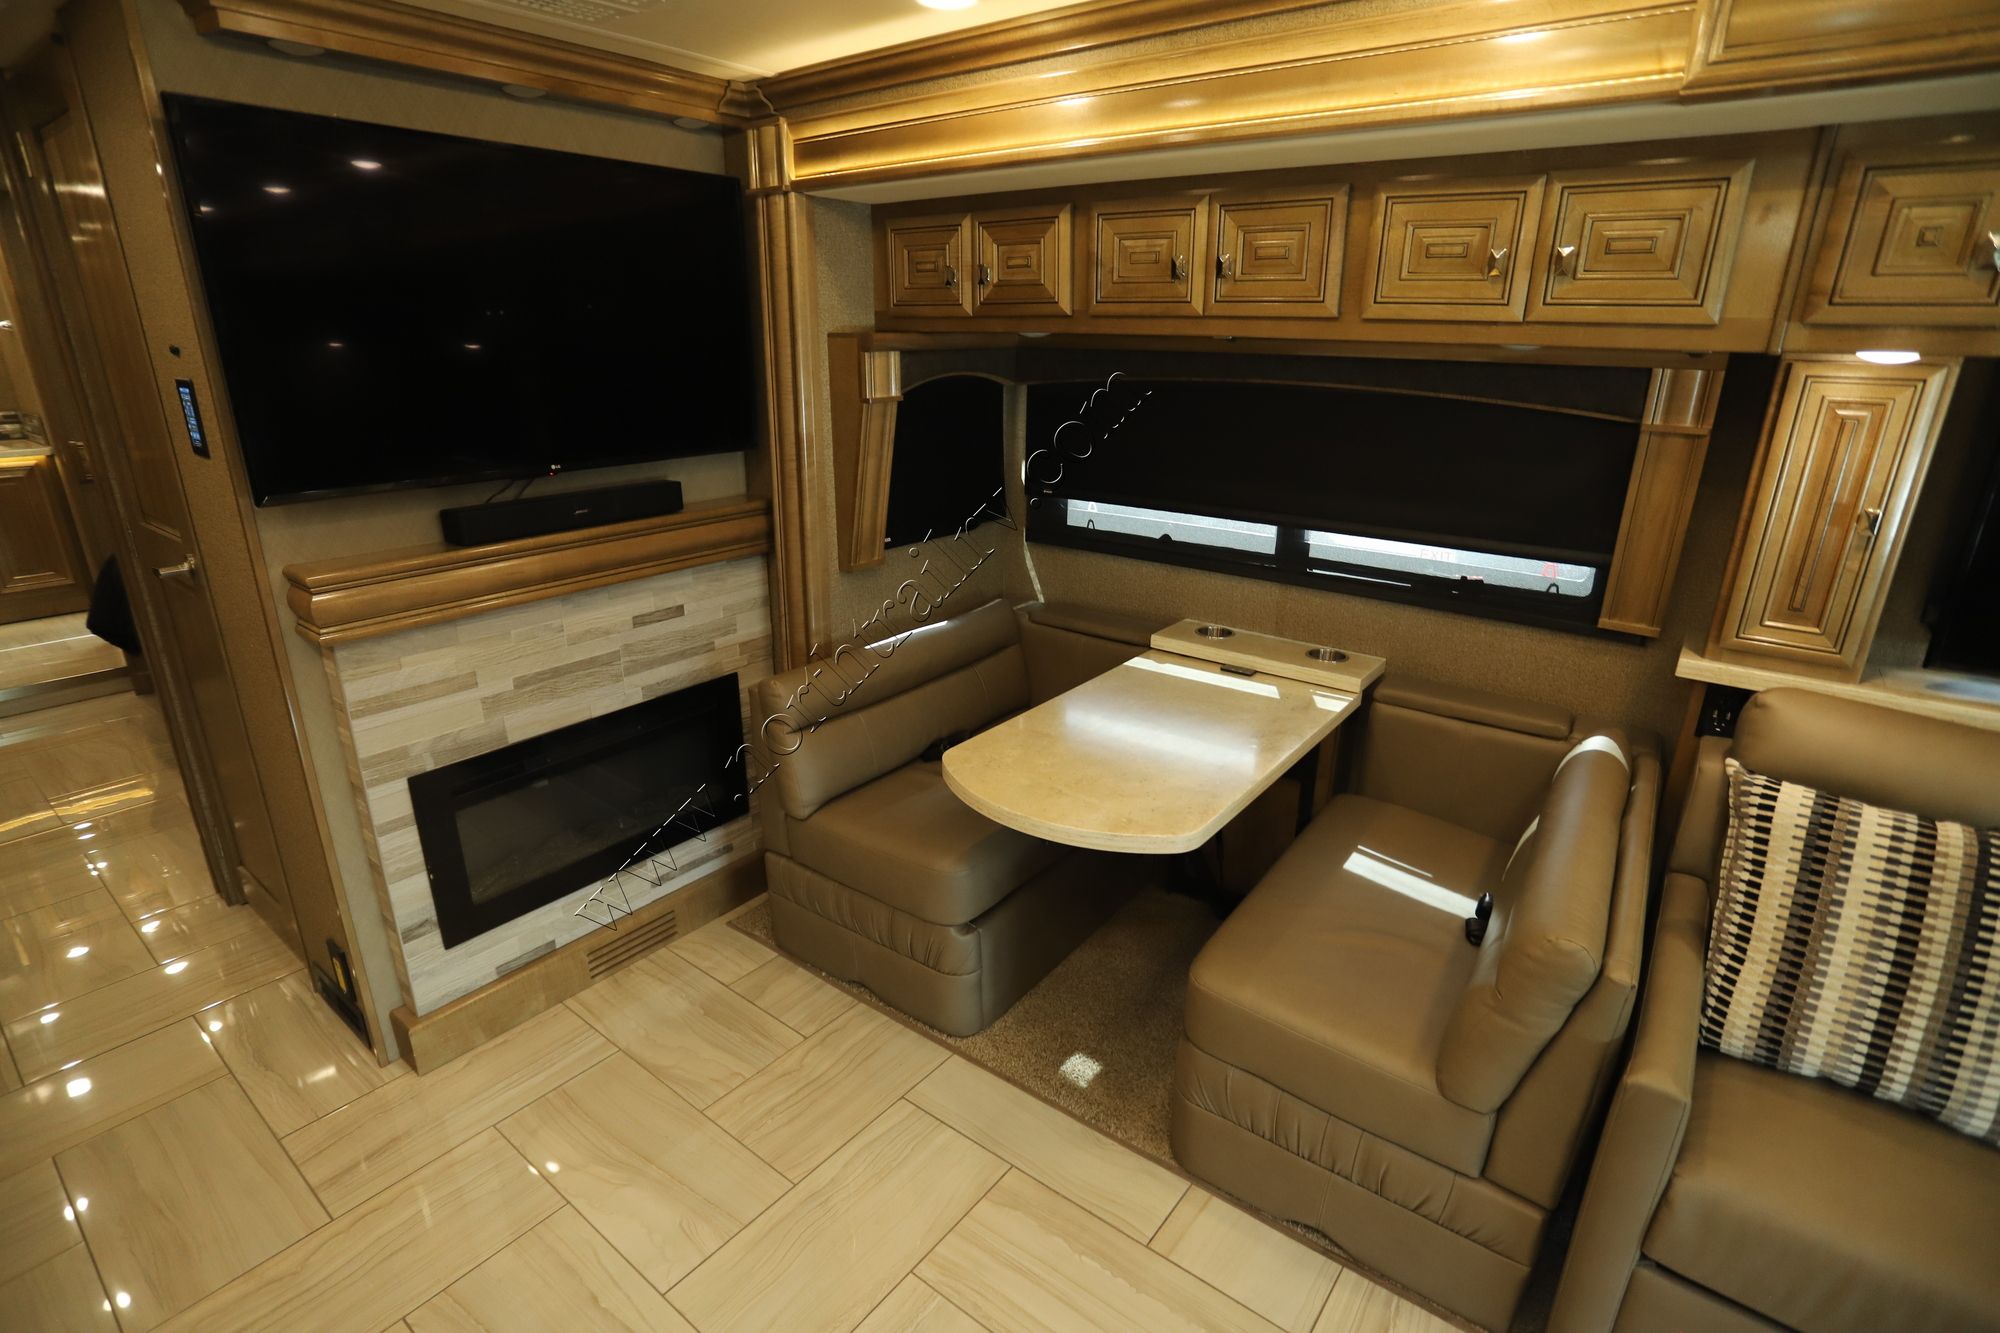 Used 2019 Fleetwood Discovery Lxe 40M Class A  For Sale